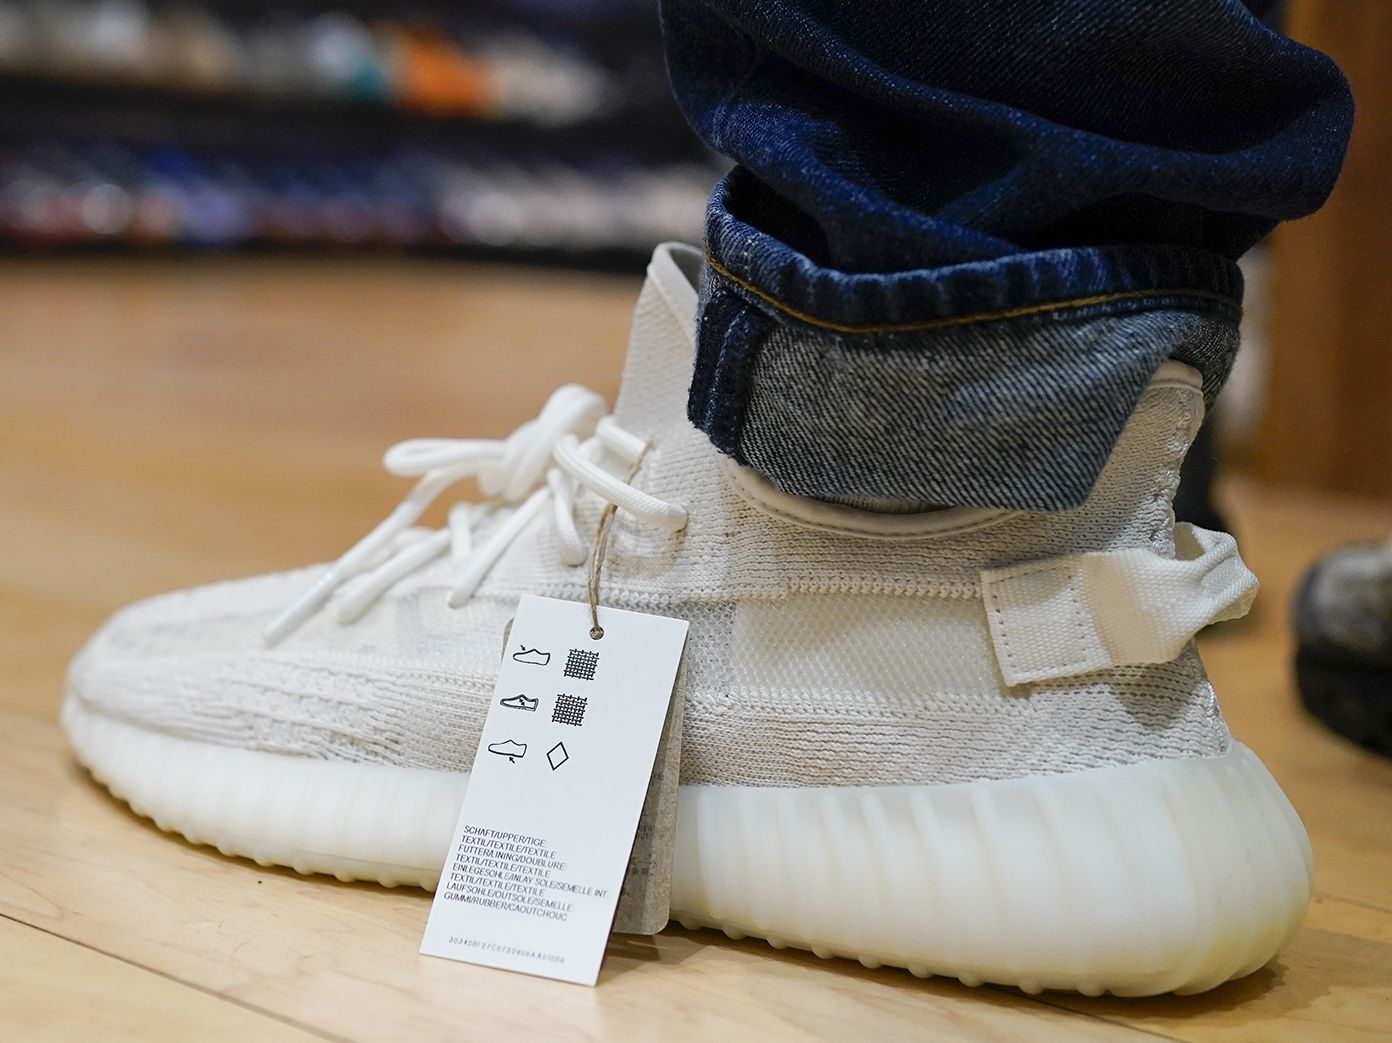 Adidas will continue sell Kanye West's shoe designs without the Yeezy name | Business